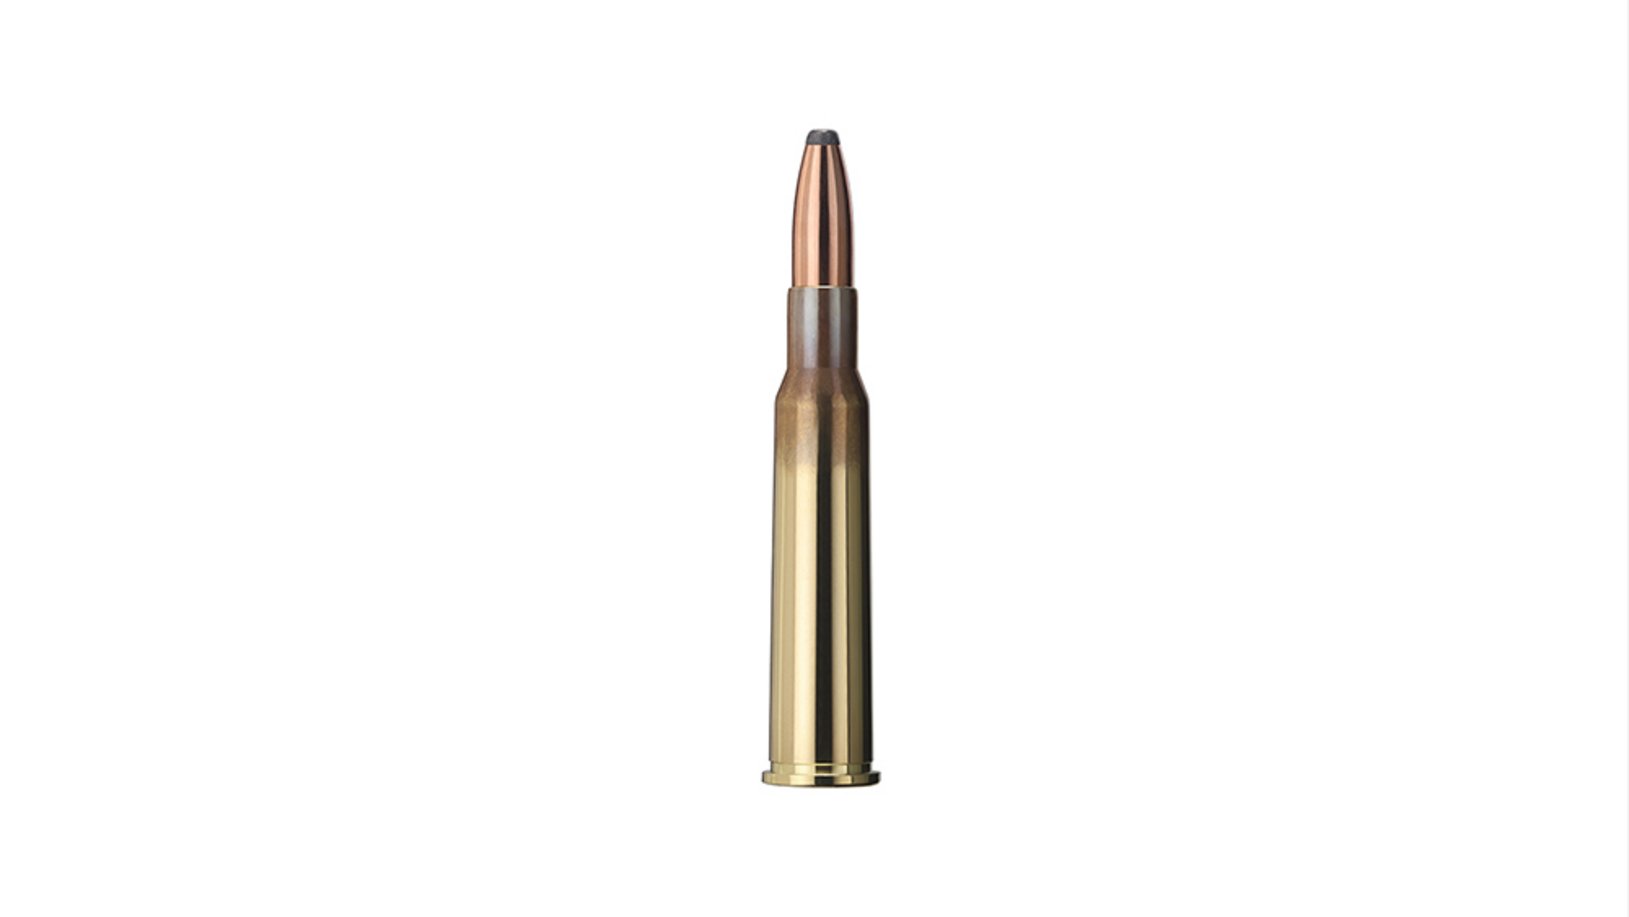 Single bullet view of GECO 7x57 R SOFTPOINT 10,7g